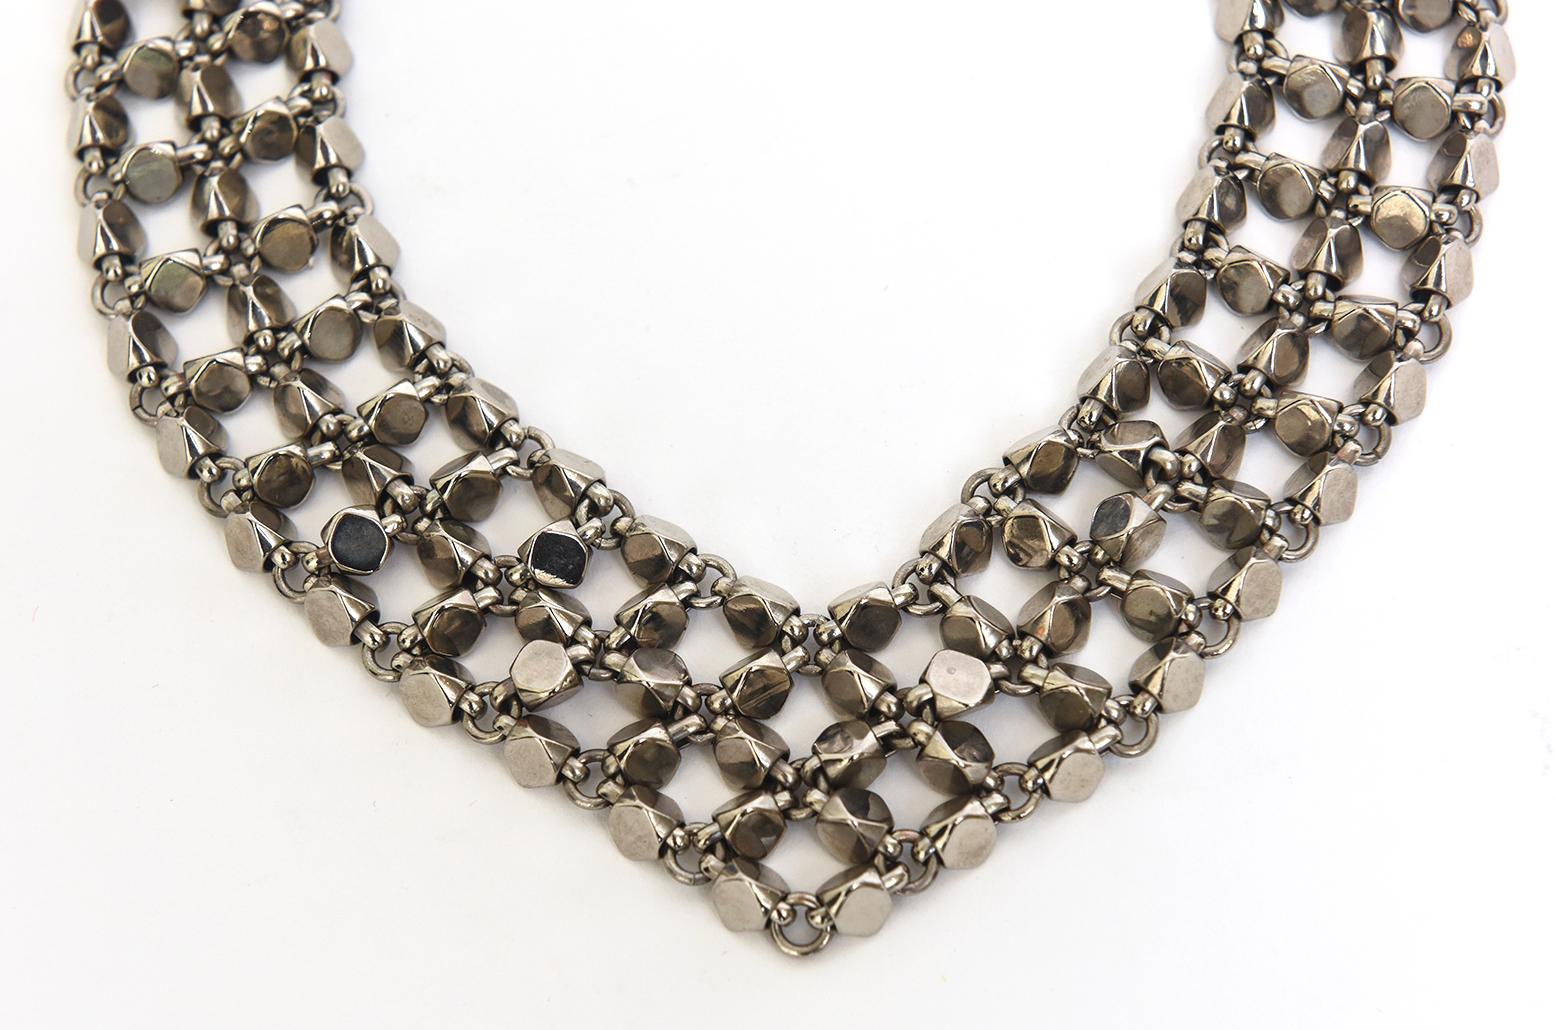  This hot fabulous rock stud Chanel signed necklace is in the shape of a V on your neck. It is signed Made in France Chanel '98. It is silver toned metal and each side has 3 rows of studs that are connected. There are many cc's on the final back